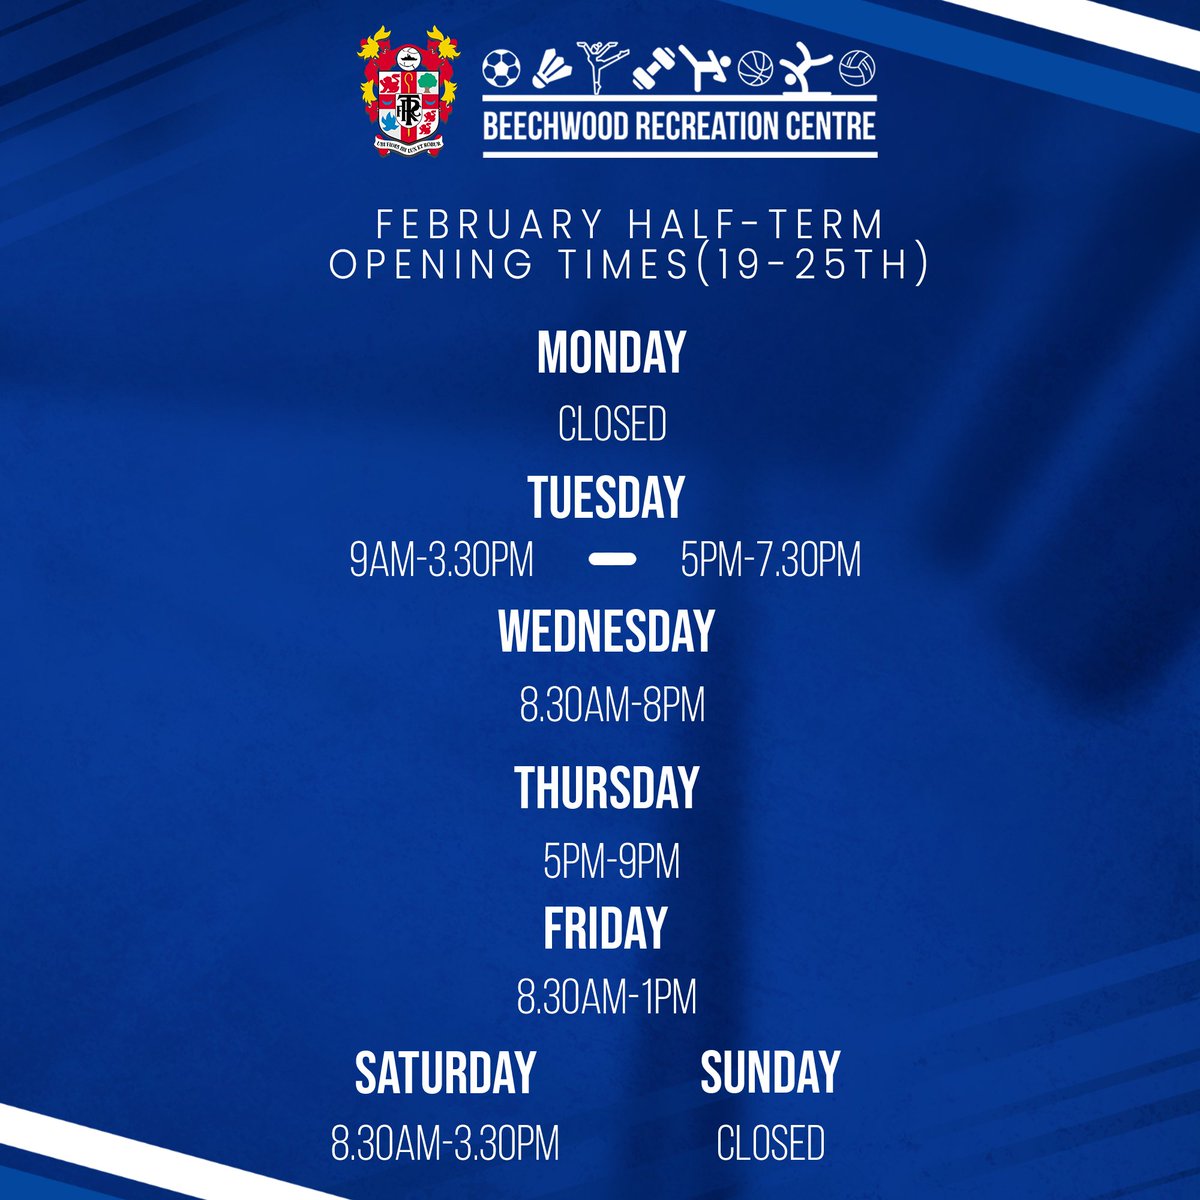 📆 Here are our opening times for the upcoming February half-term (19-25th February). Apologies for any inconvenience caused by the change of hours for the week. #TRFC #SWA